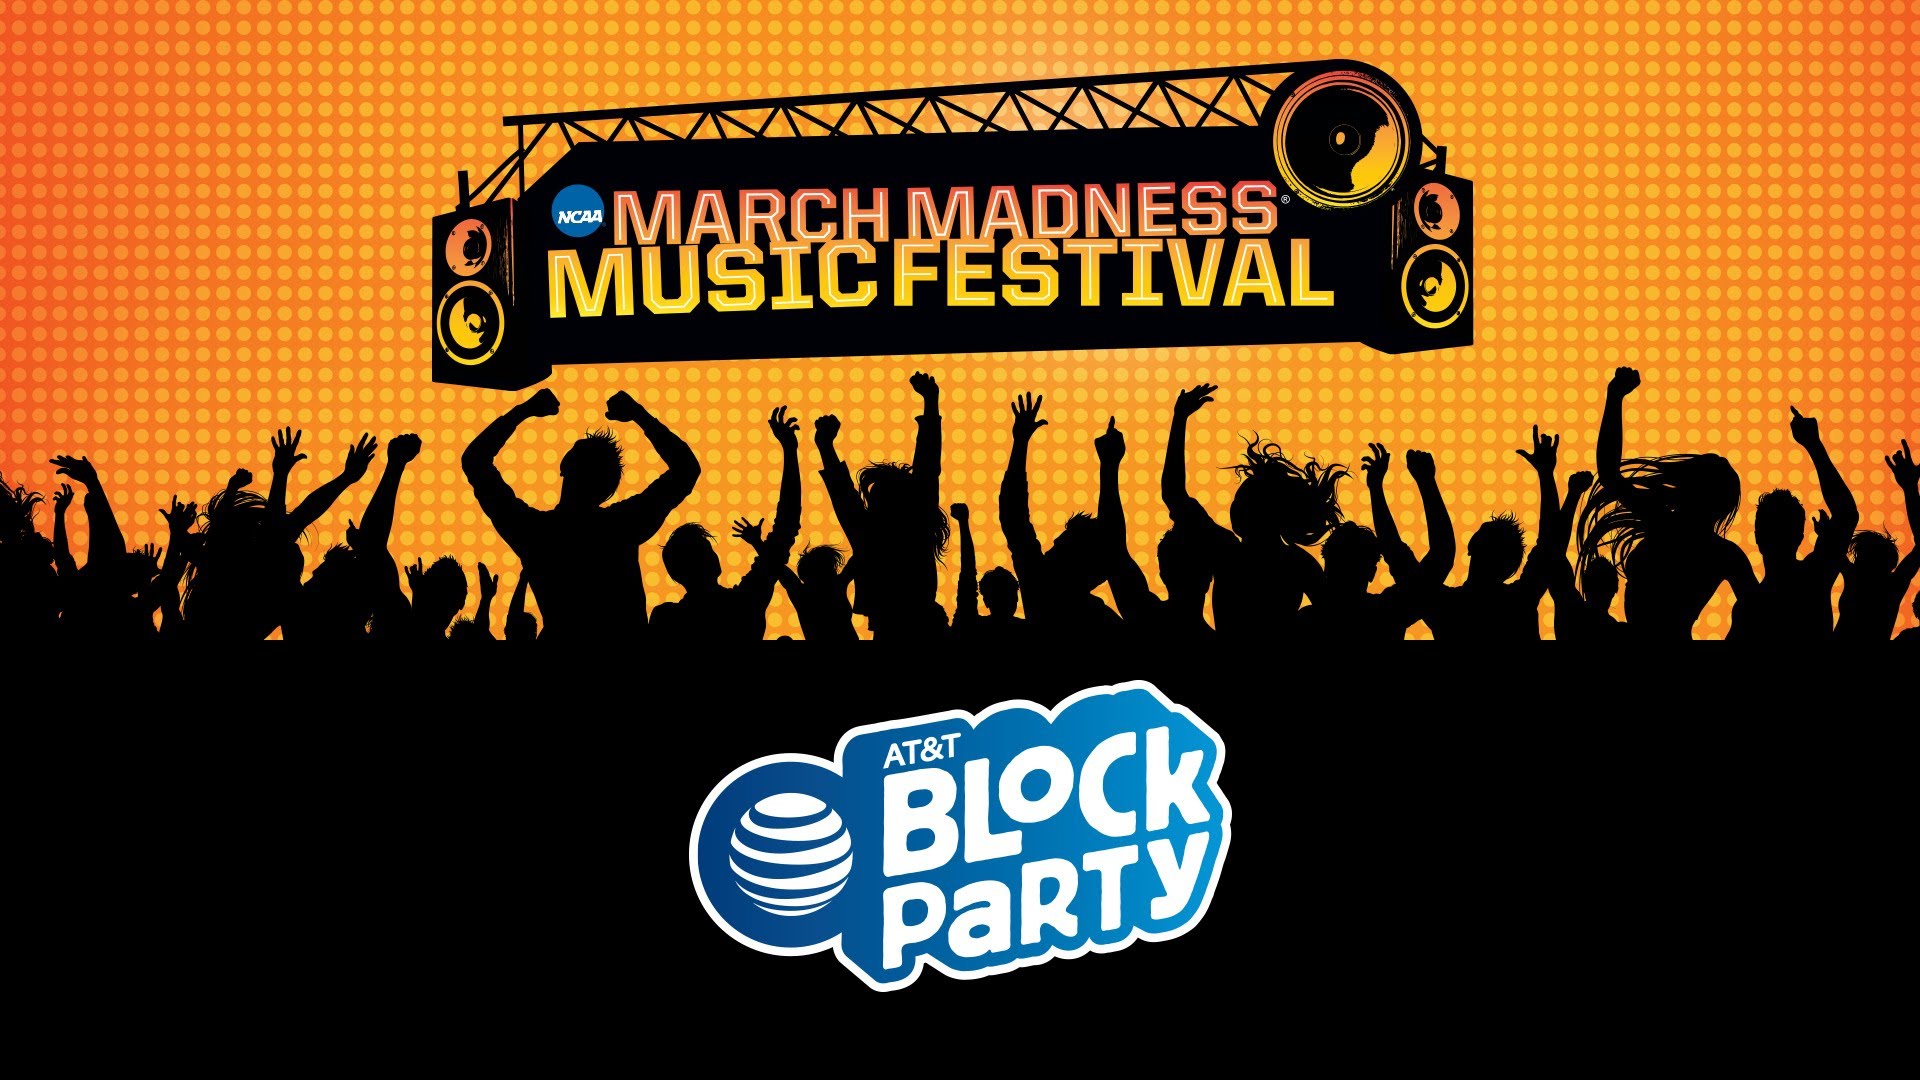 March Madness Music Fest presented by AT&T YouTube